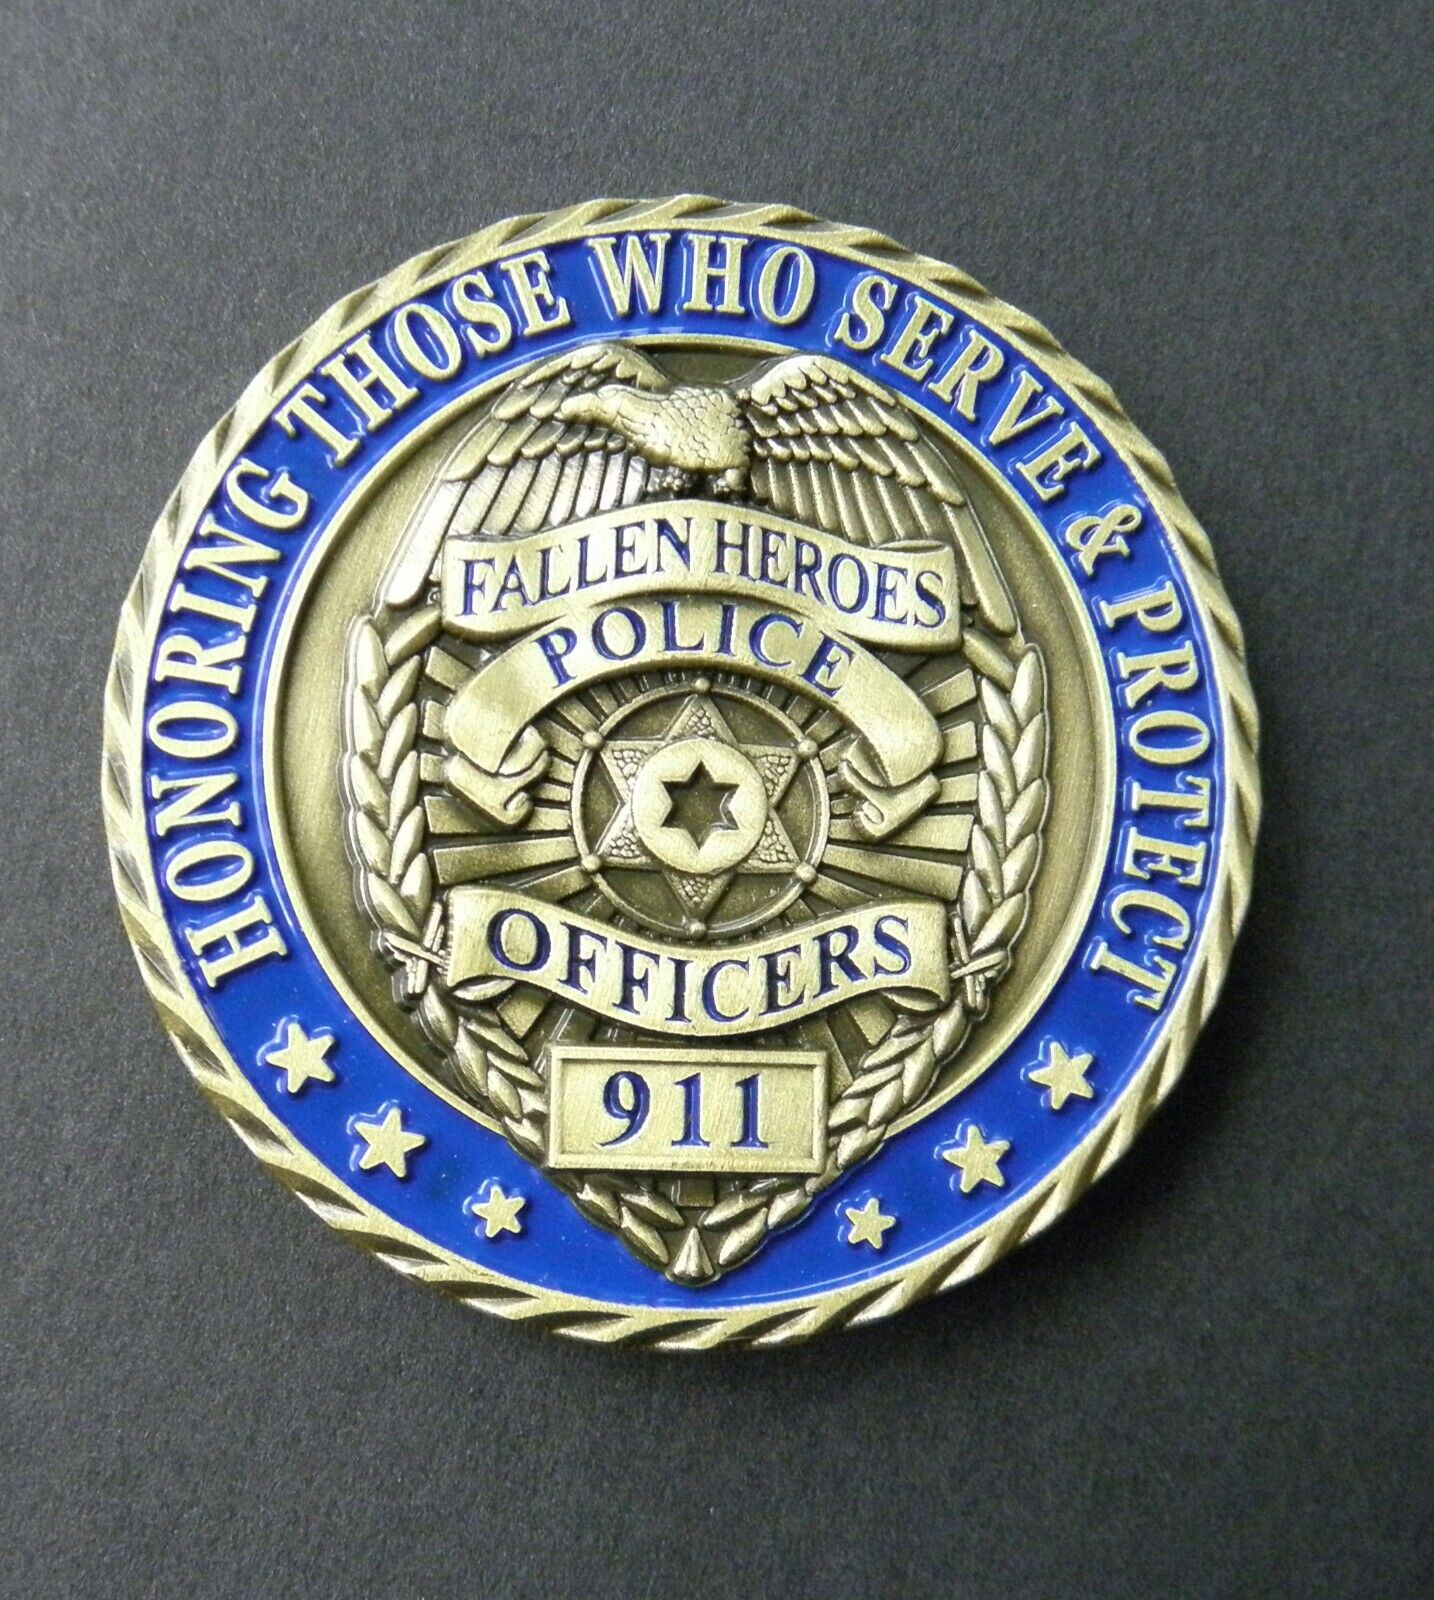 POLICE OFFICER THIN BLUE LINE CHALLENGE COIN 911 FALLEN HEROES 1.75 INCHES